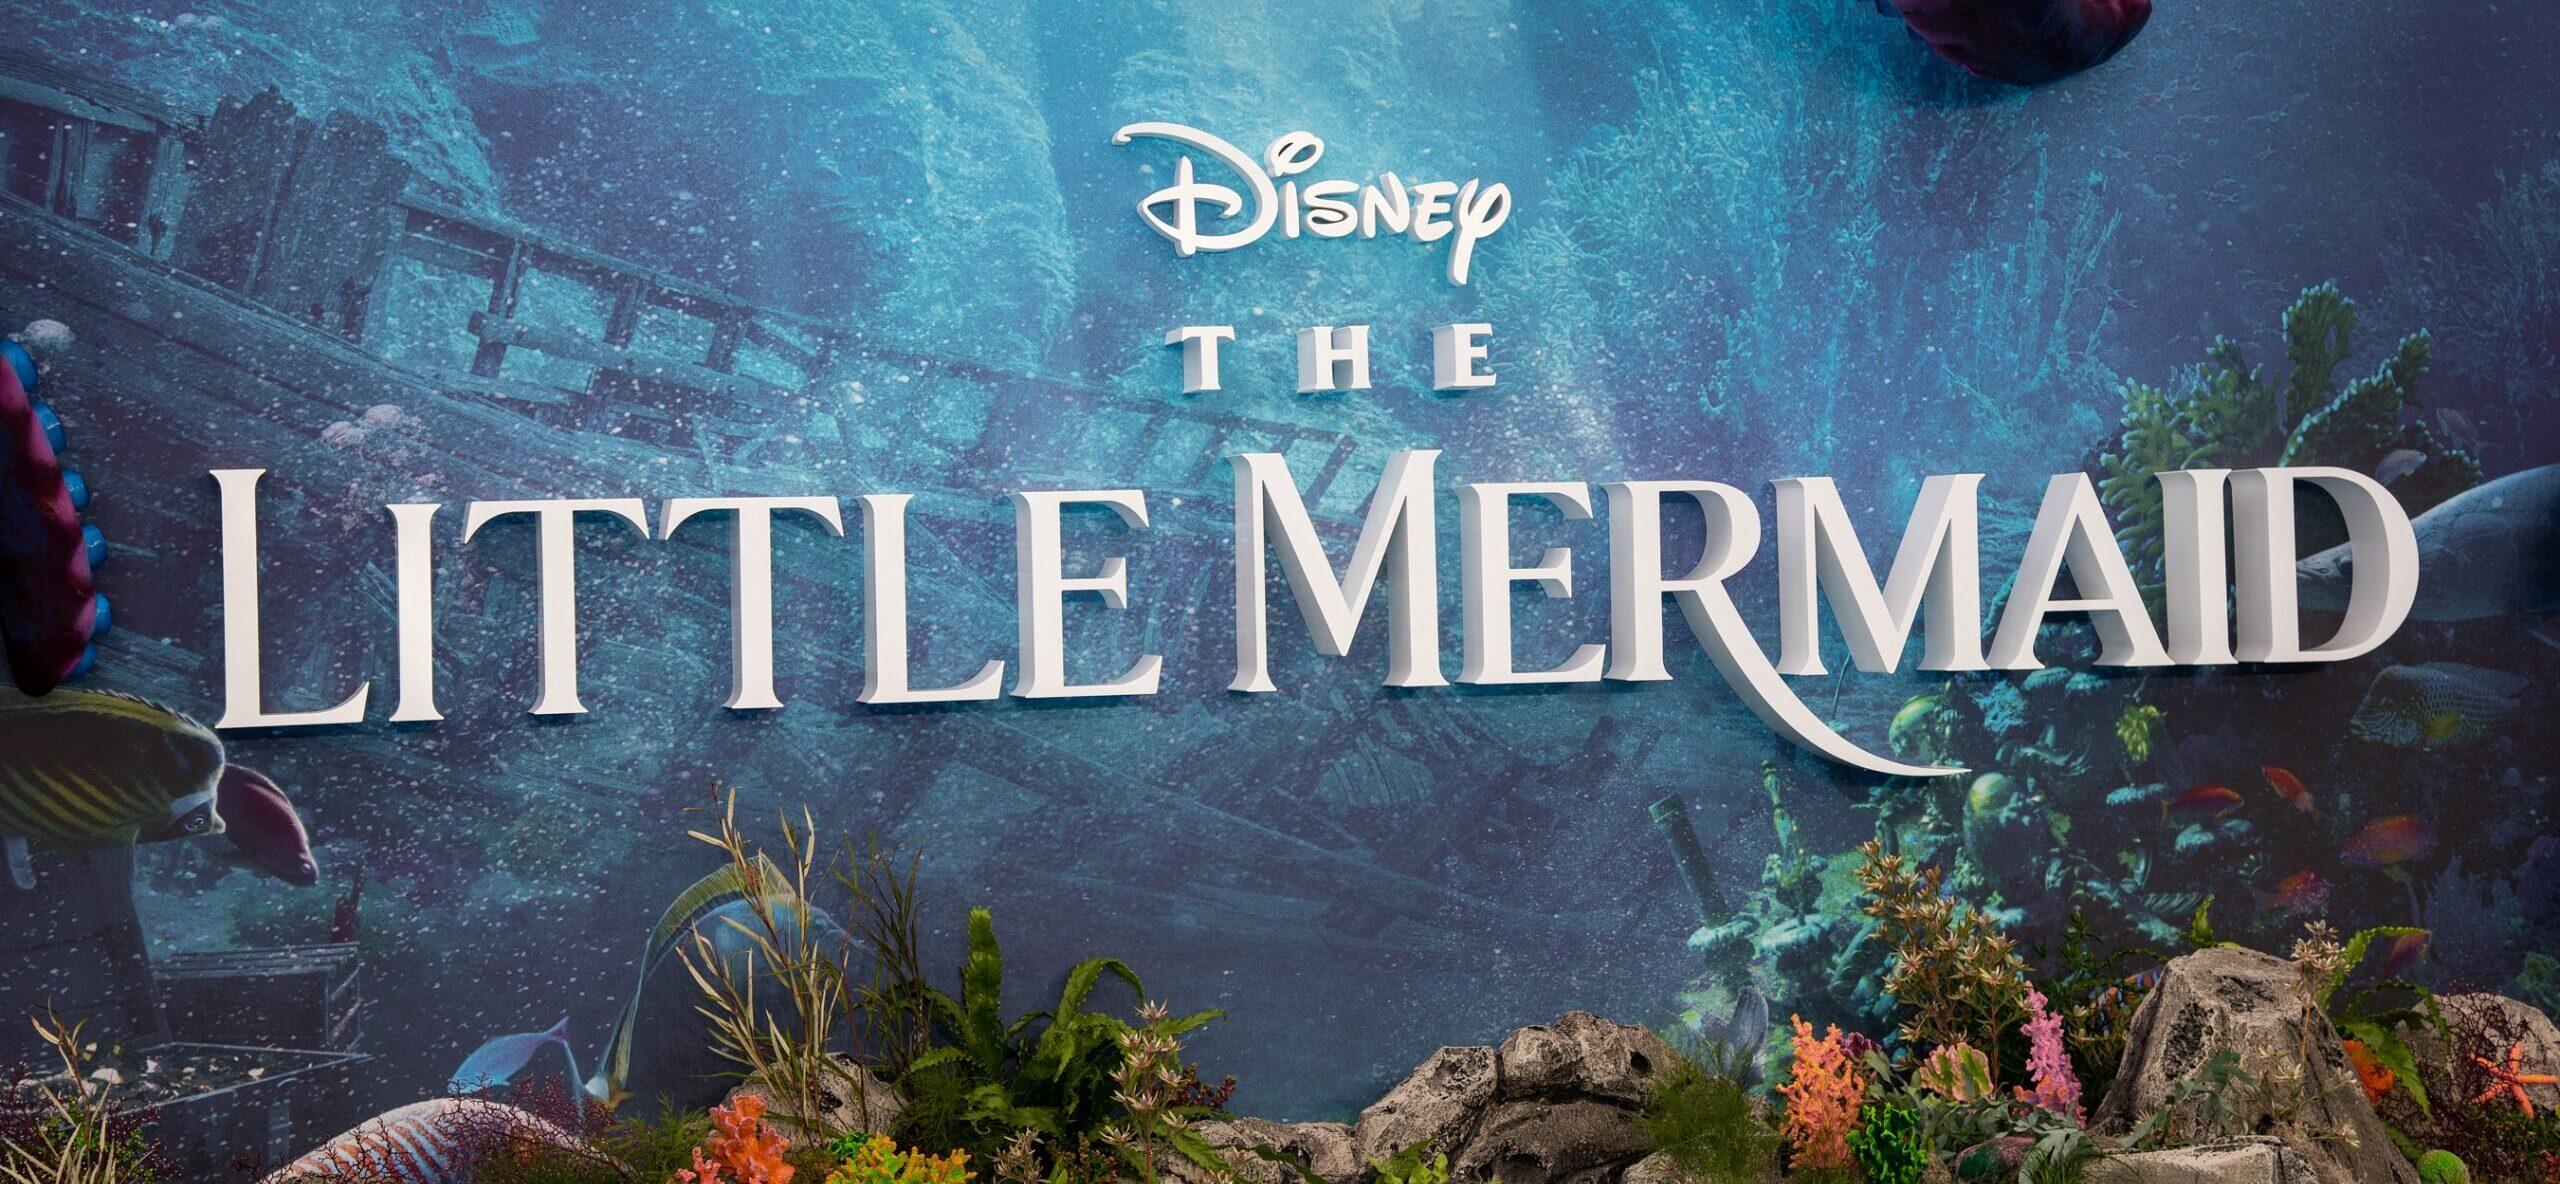 Special Effects Artist Sues ‘The Little Mermaid’ Producers Over On-Set Injury